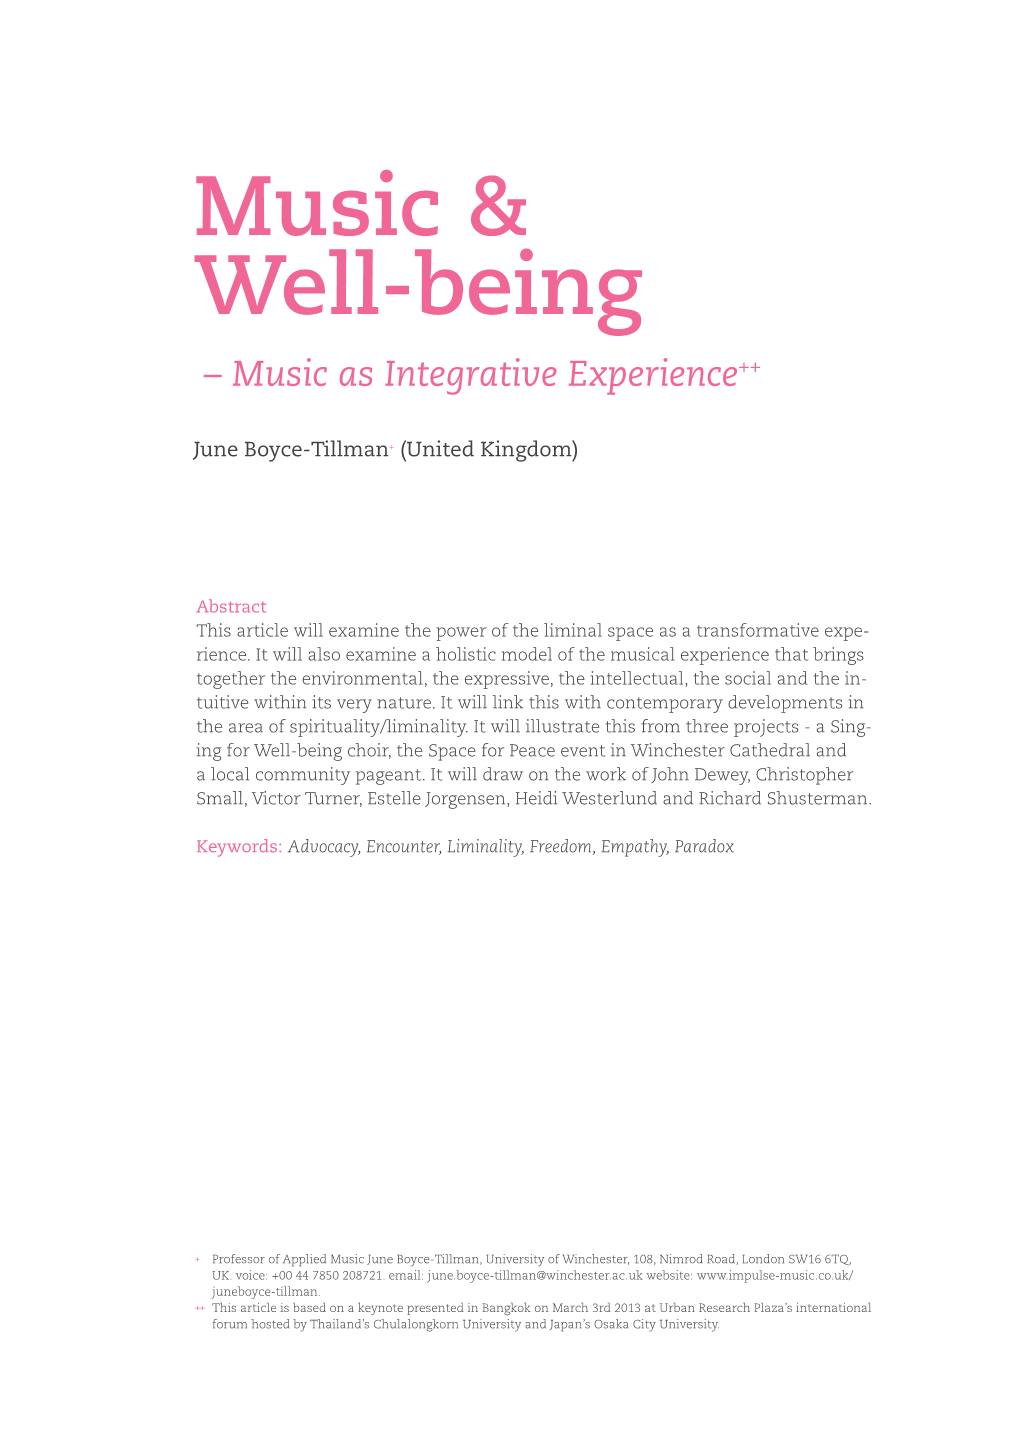 Music & Well-Being